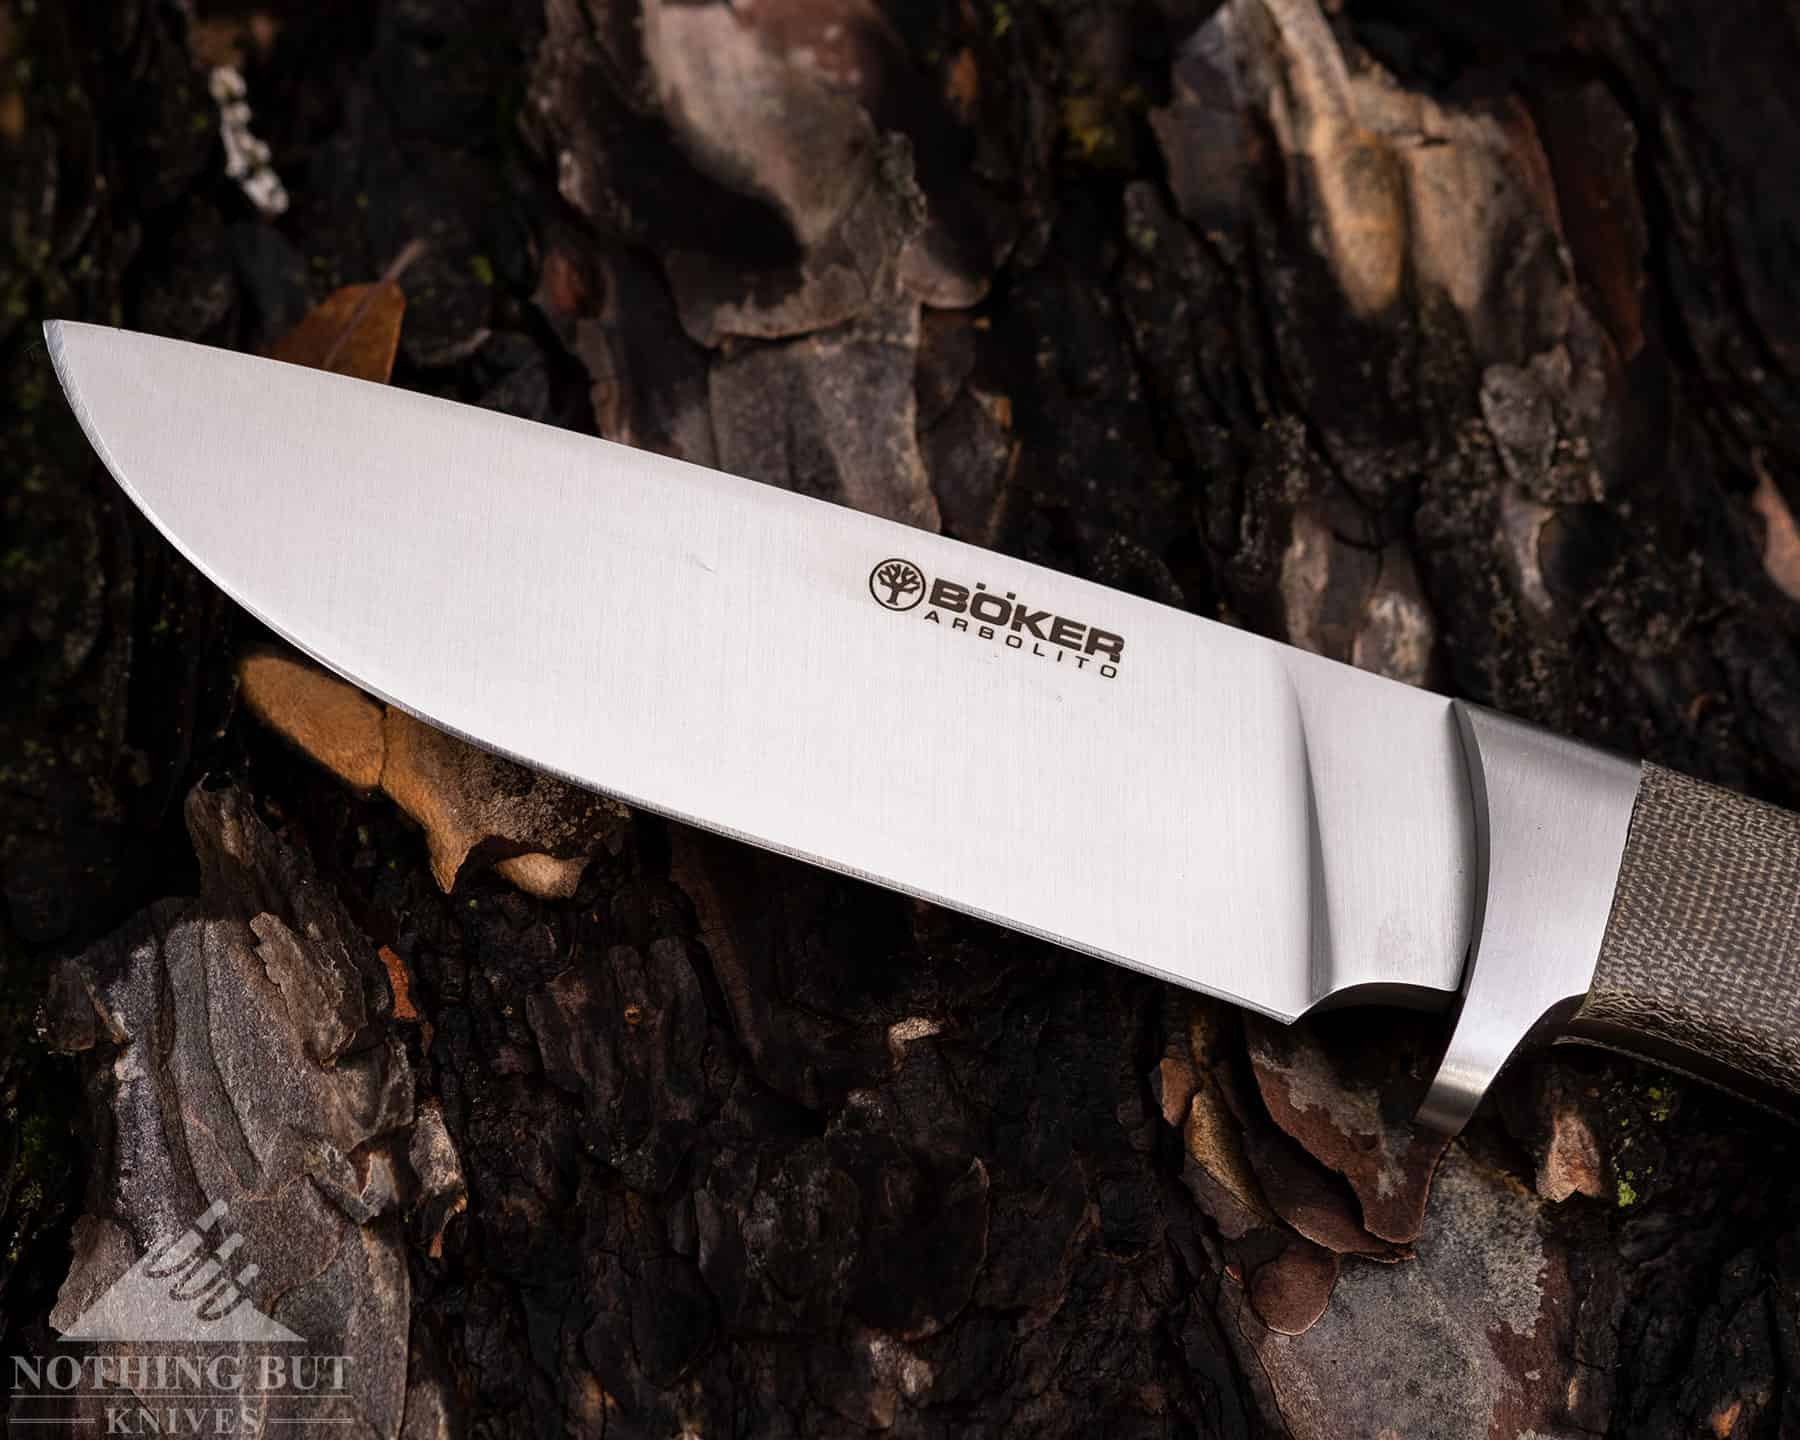 The blade of the Arbolito Hunter is made of ACX 390 steel, and it features a drop point style blade. 